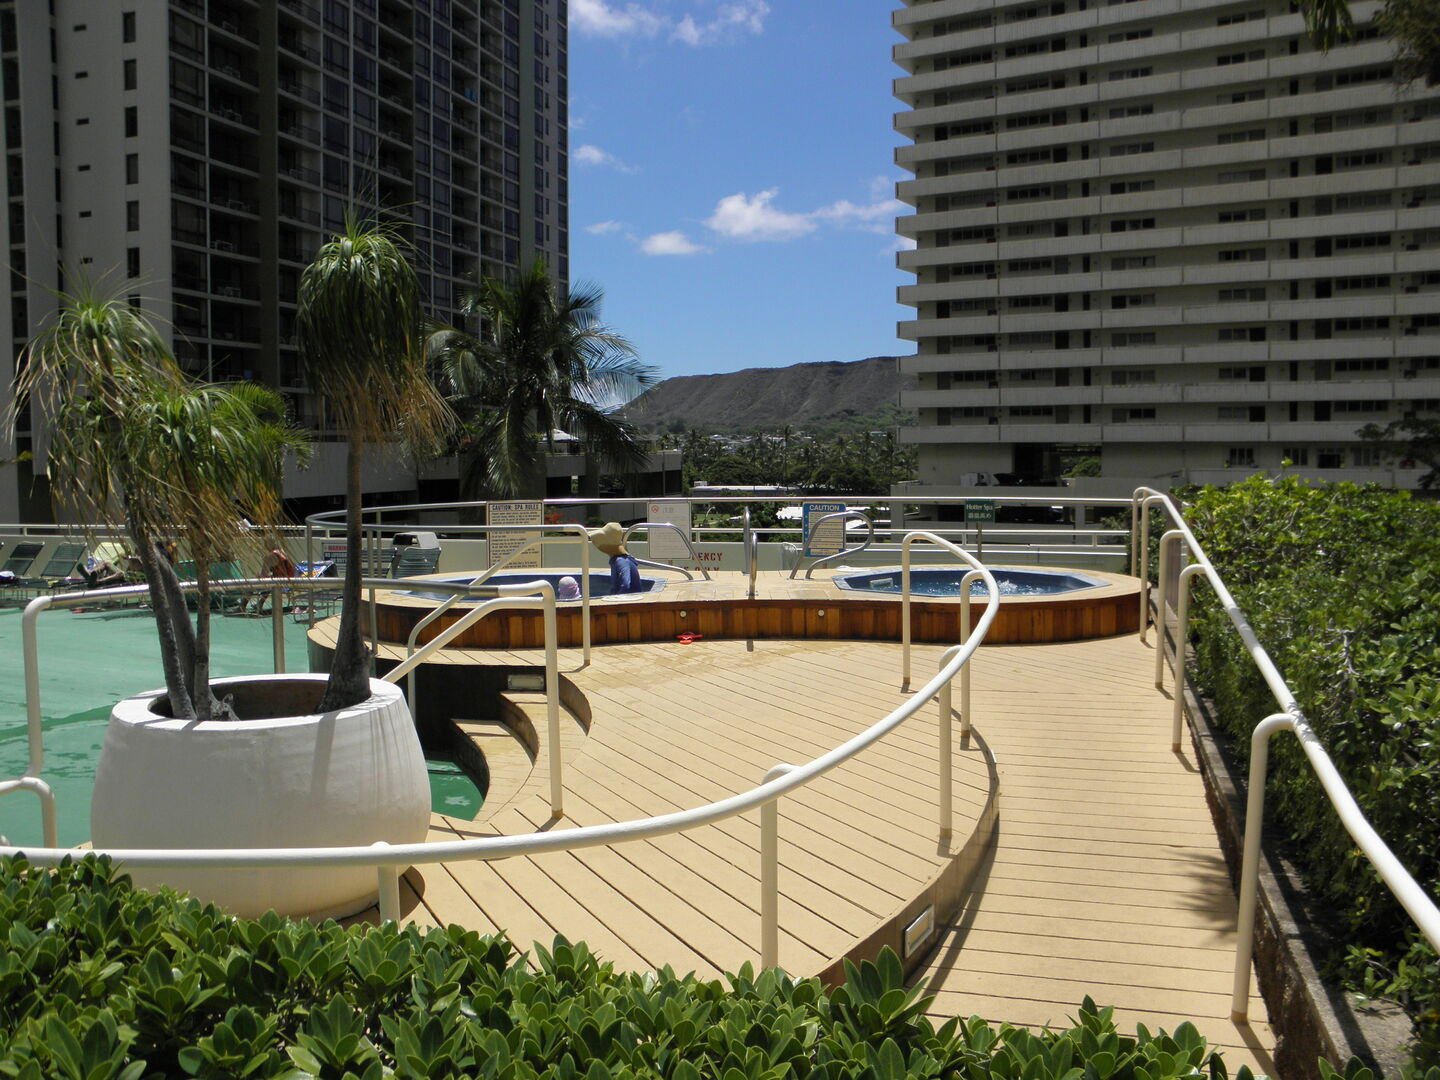 Two Hot tubs on the 6th floor recreation deck